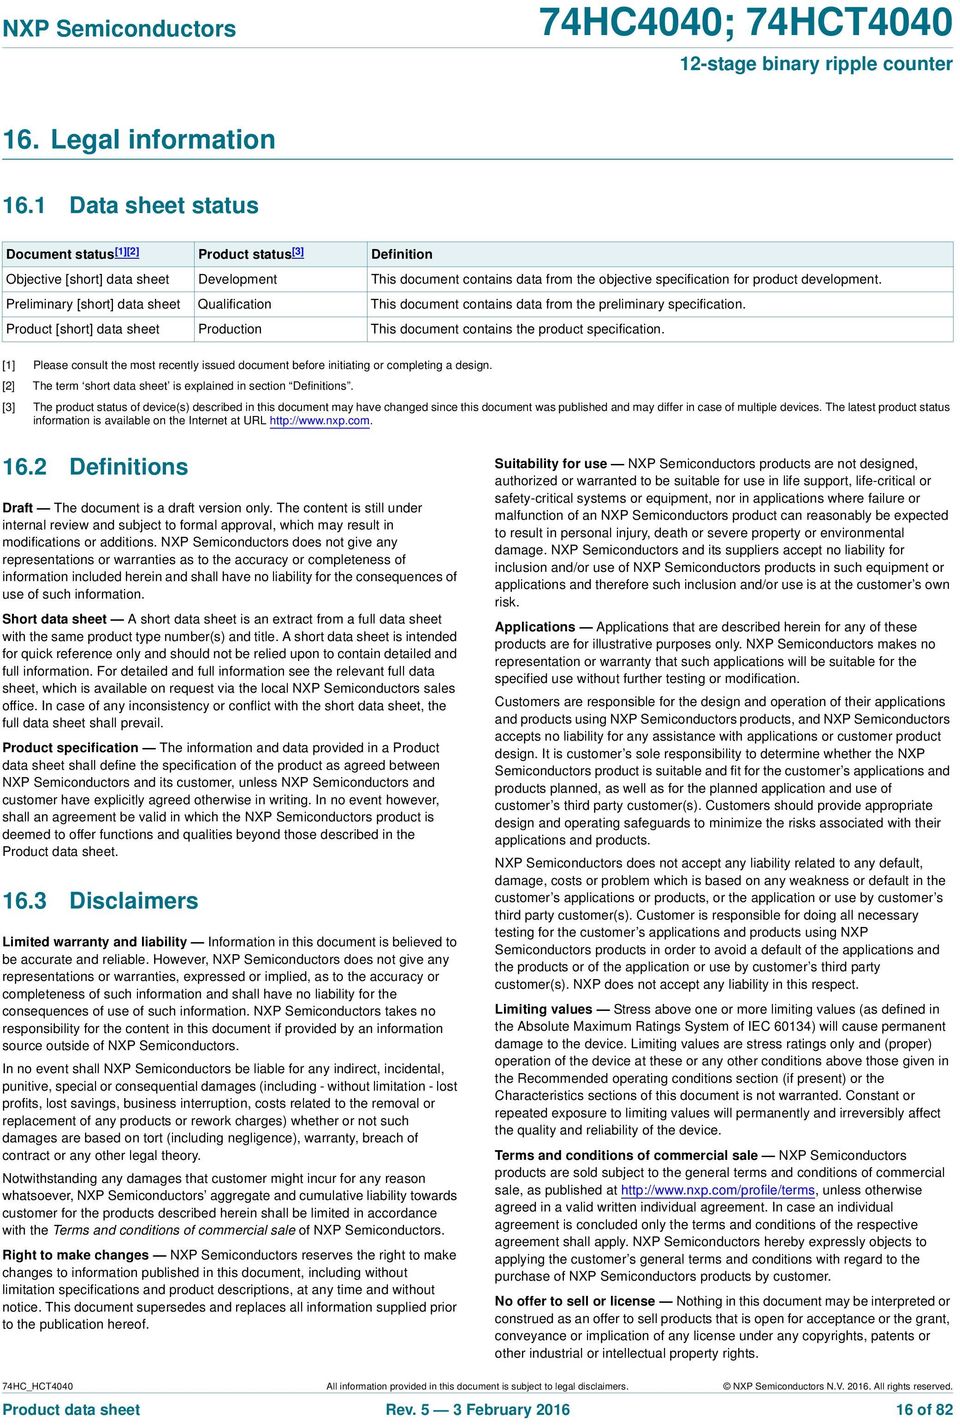 Preliminary [short] data sheet Qualification This document contains data from the preliminary specification. Product [short] data sheet Production This document contains the product specification.